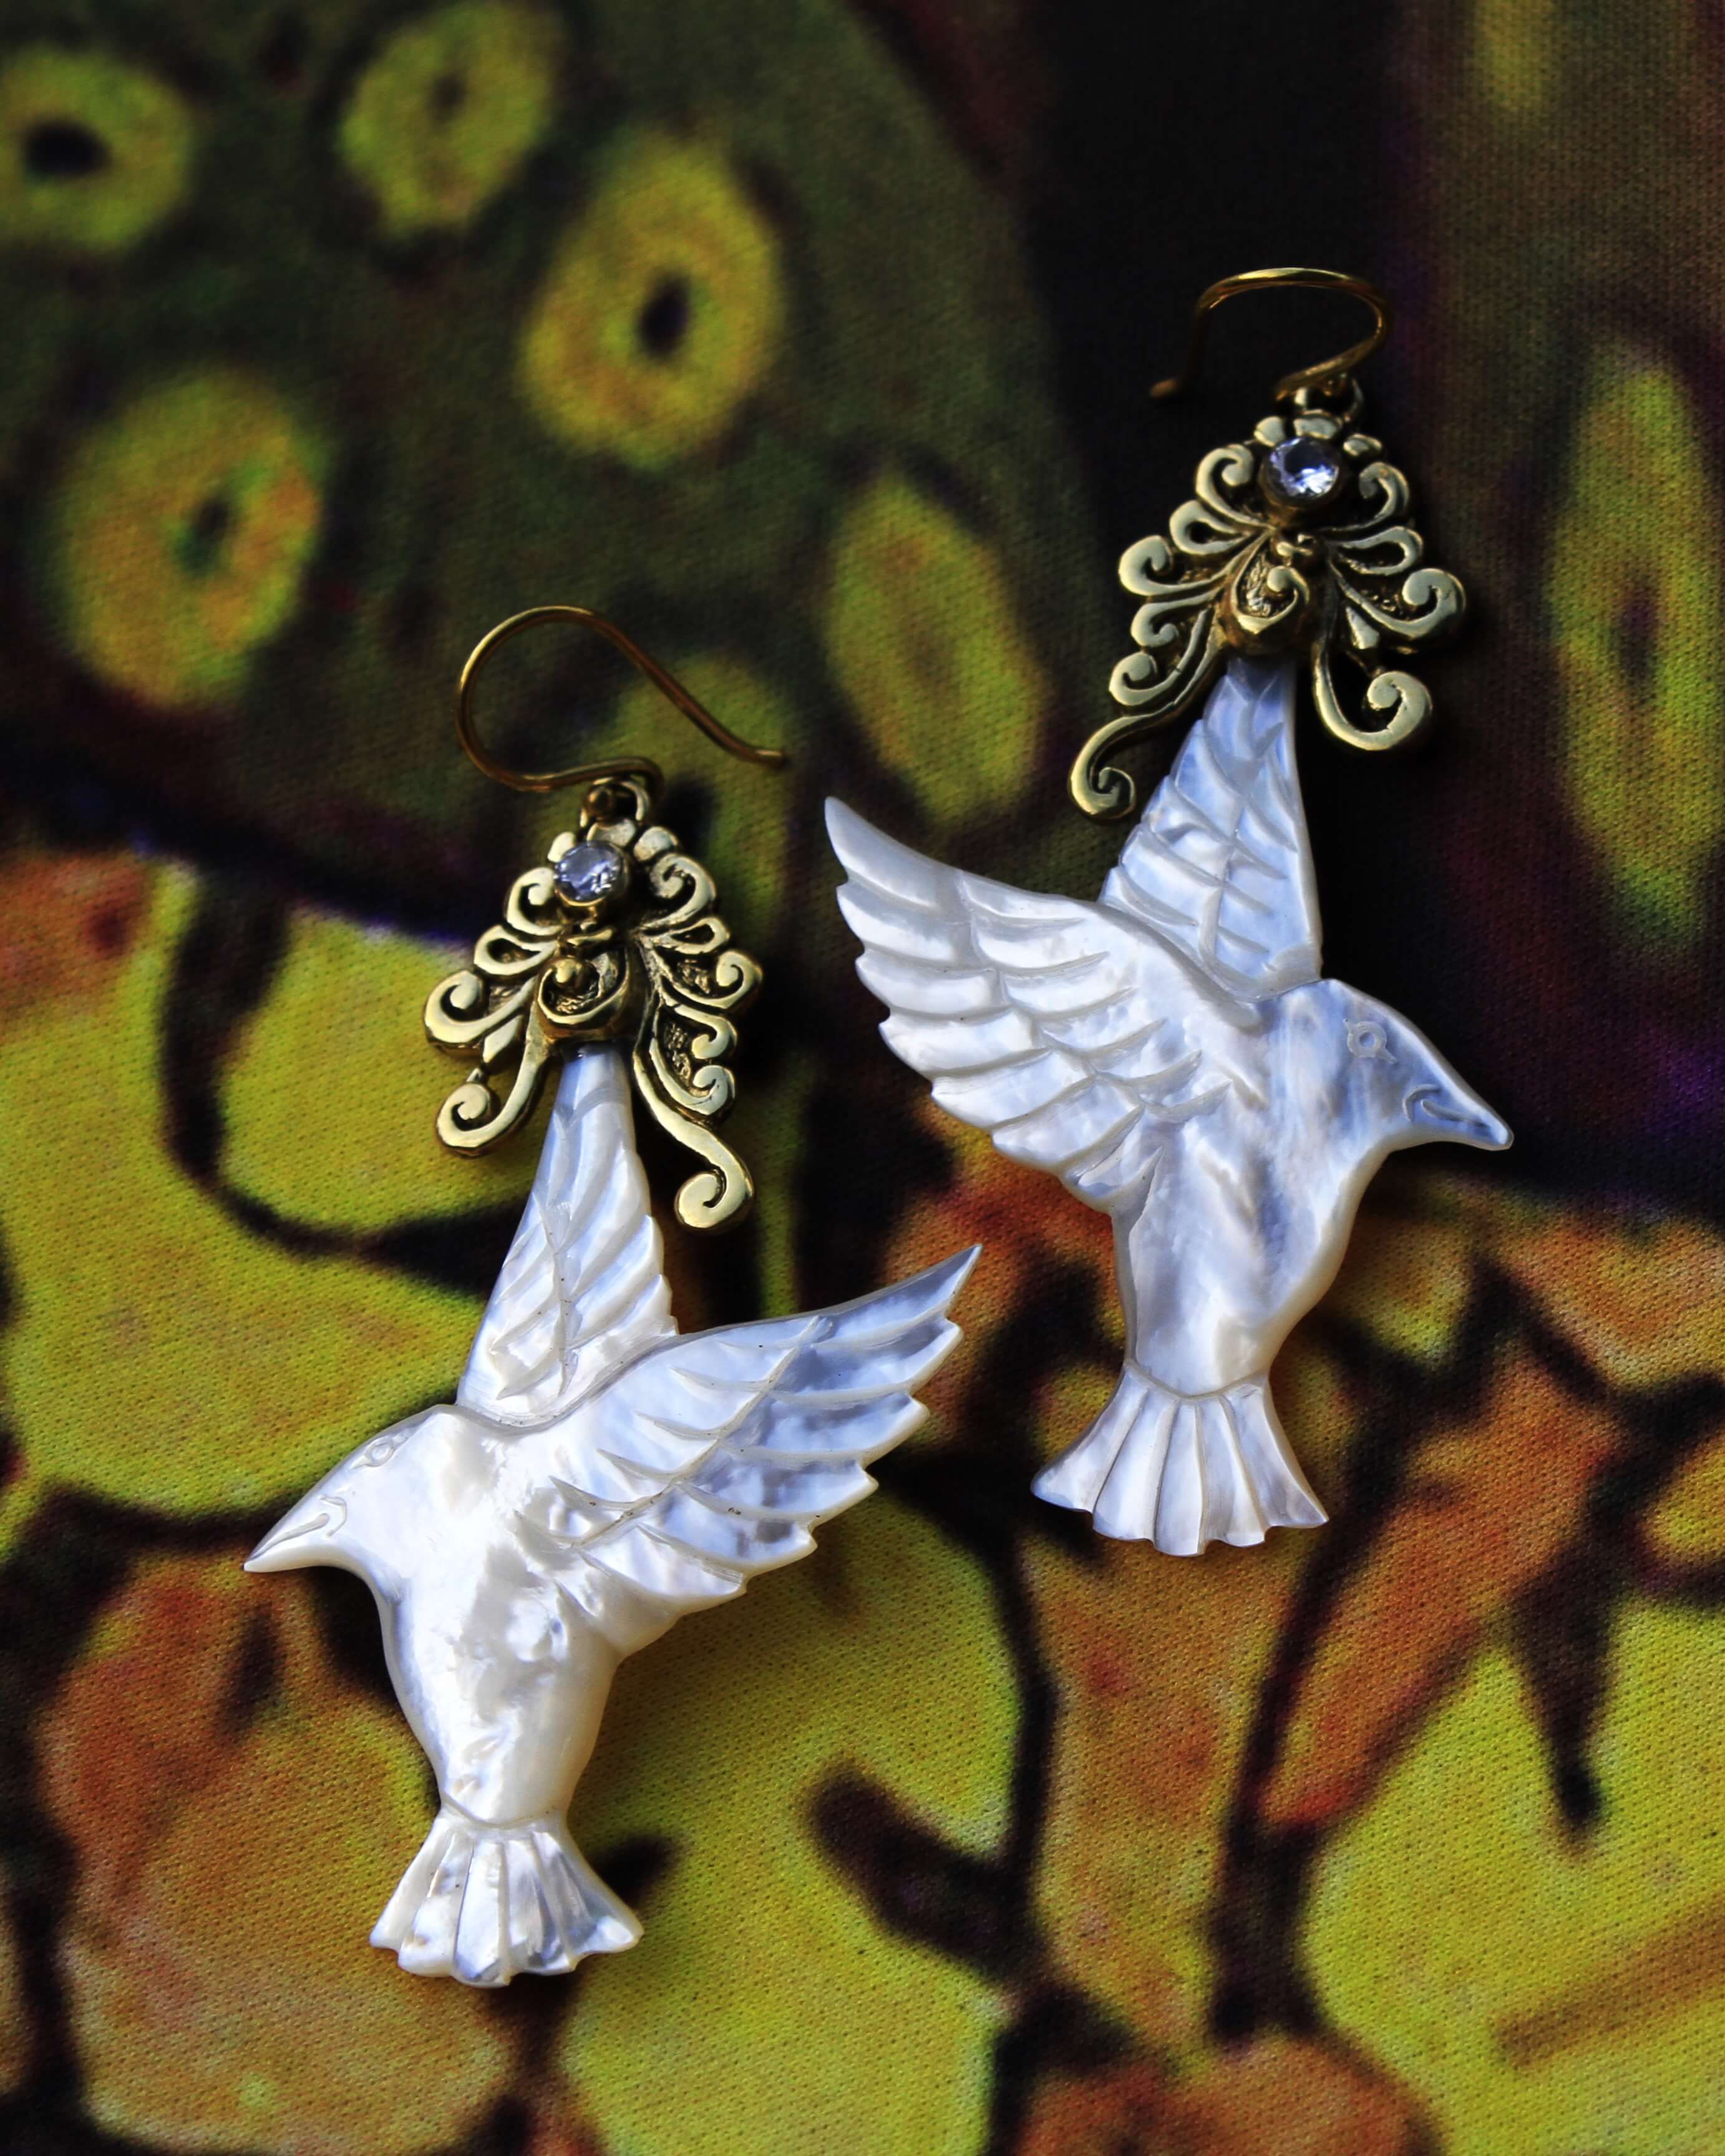 humming bird earrings carved from mother of pearl and brass findings